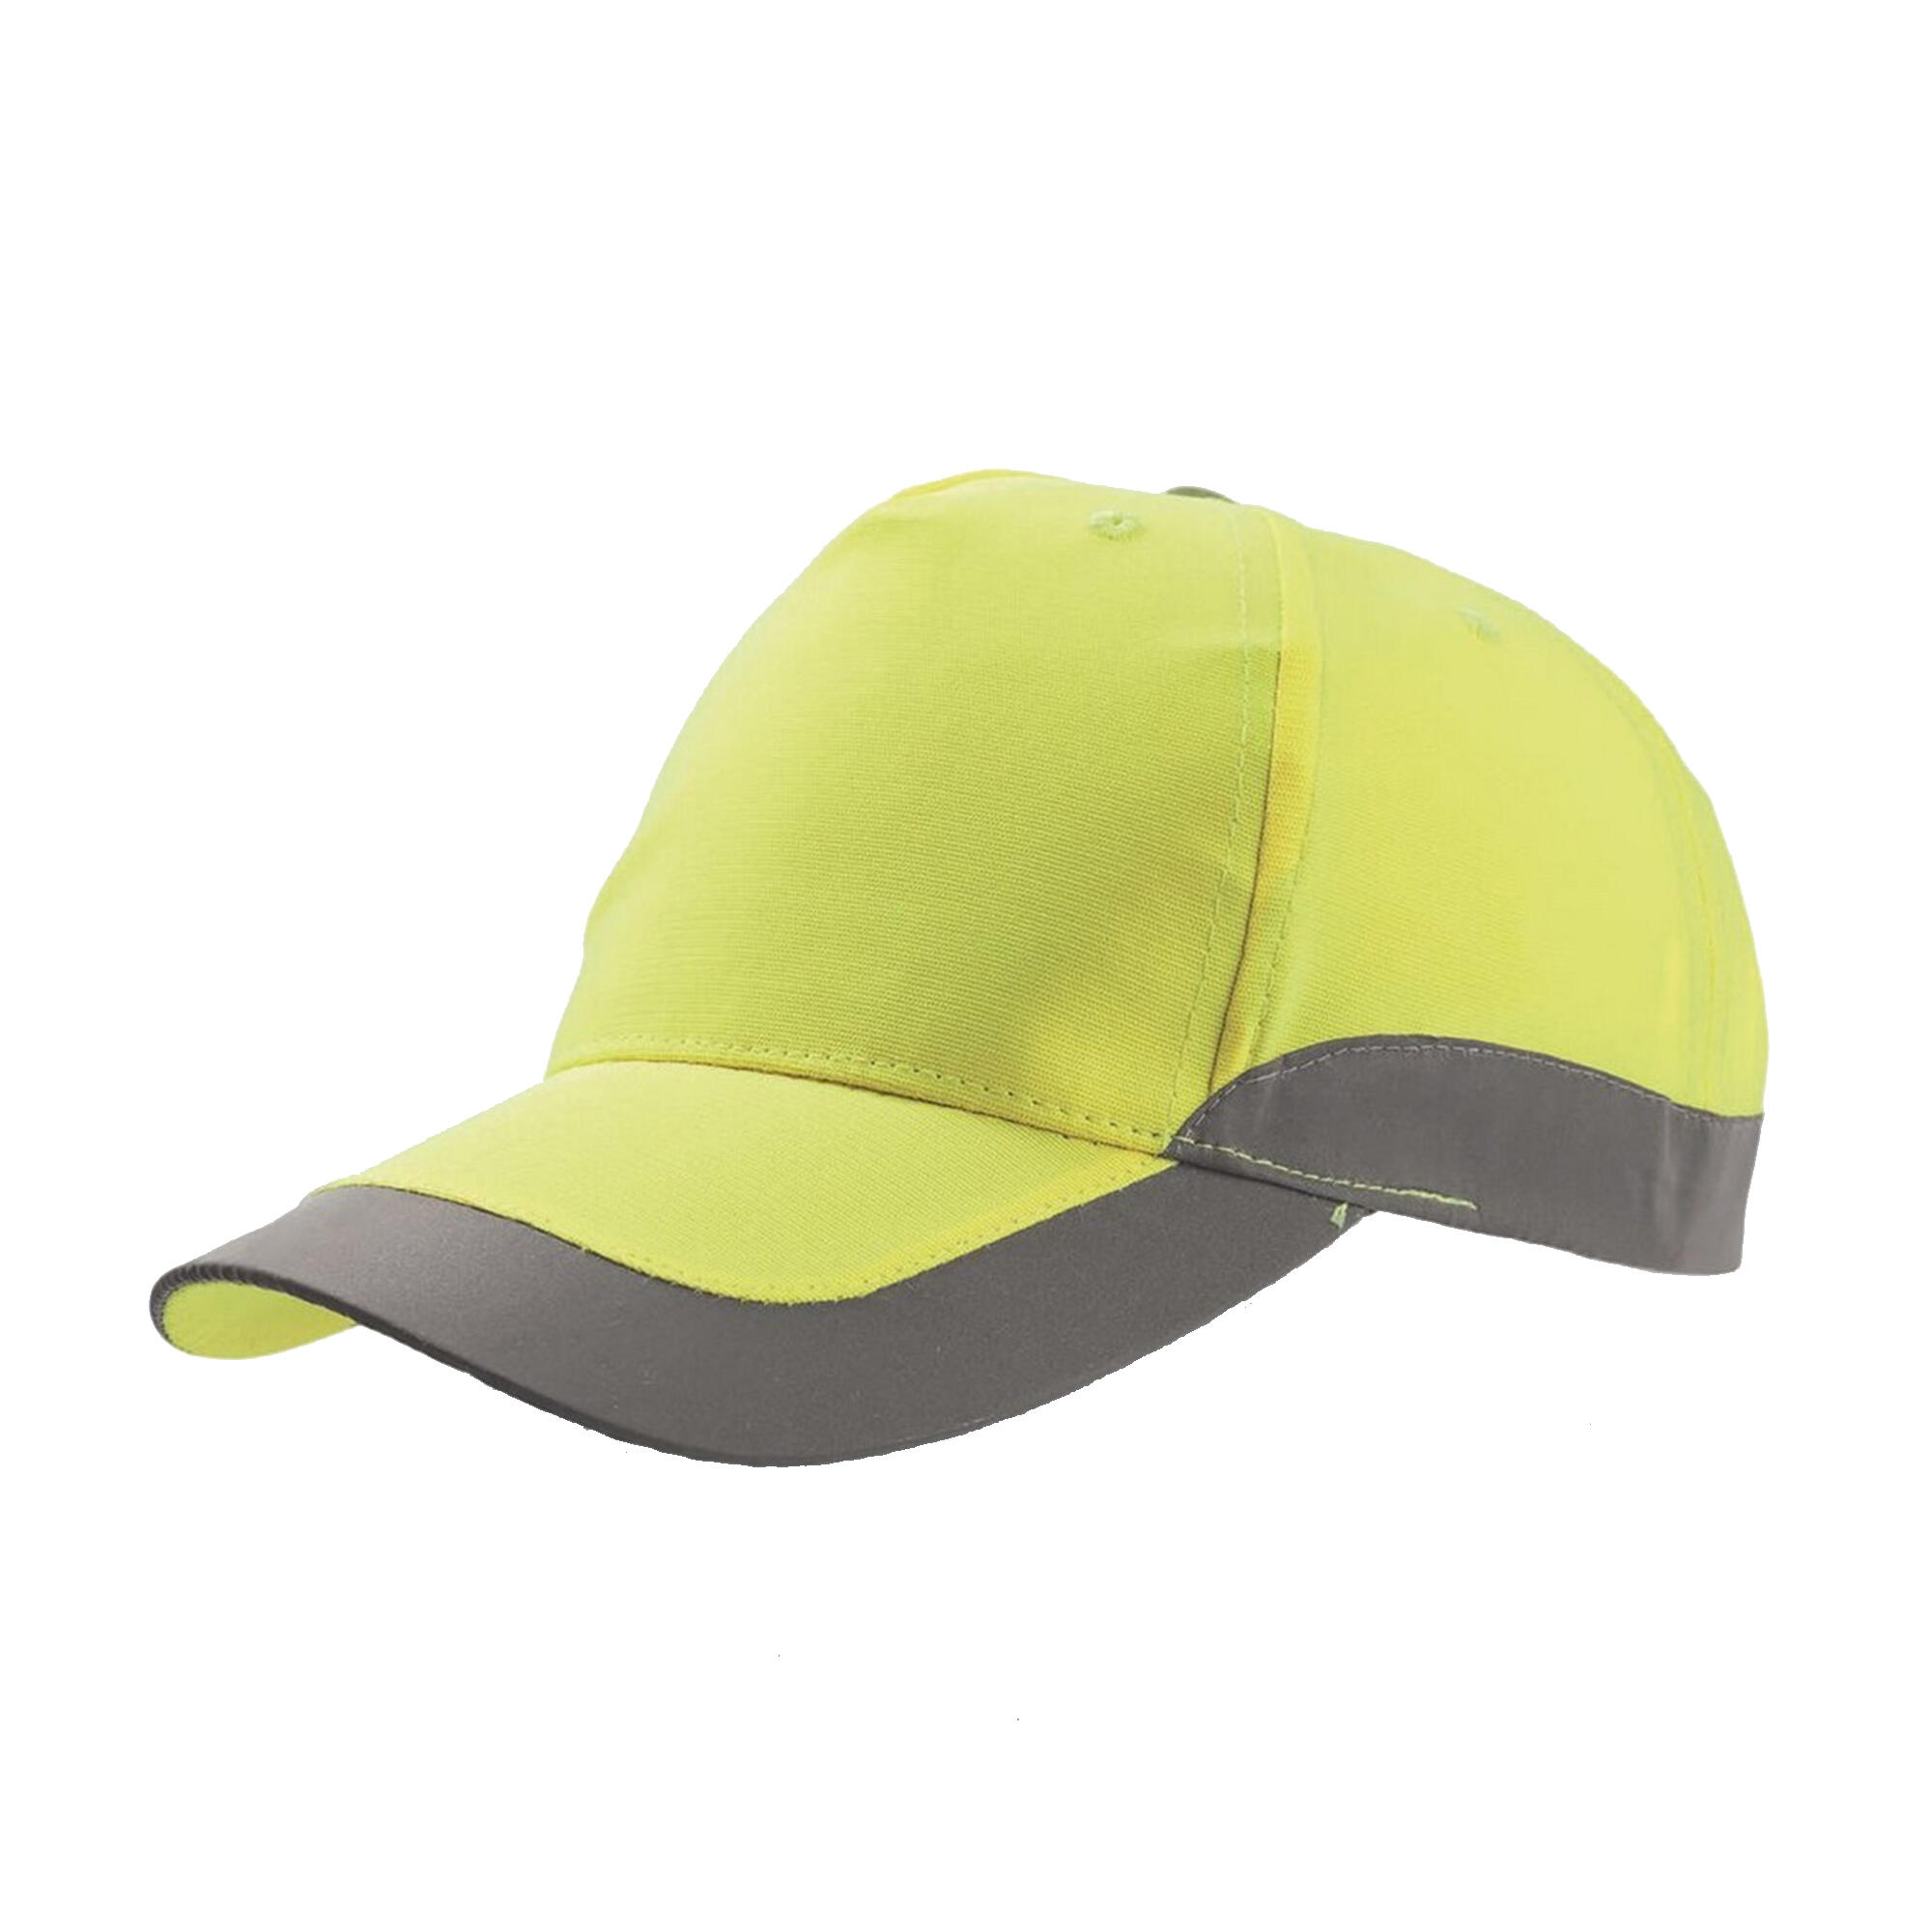 Helpy 5 Panel Reflective Cap (Safety Yellow) 1/4